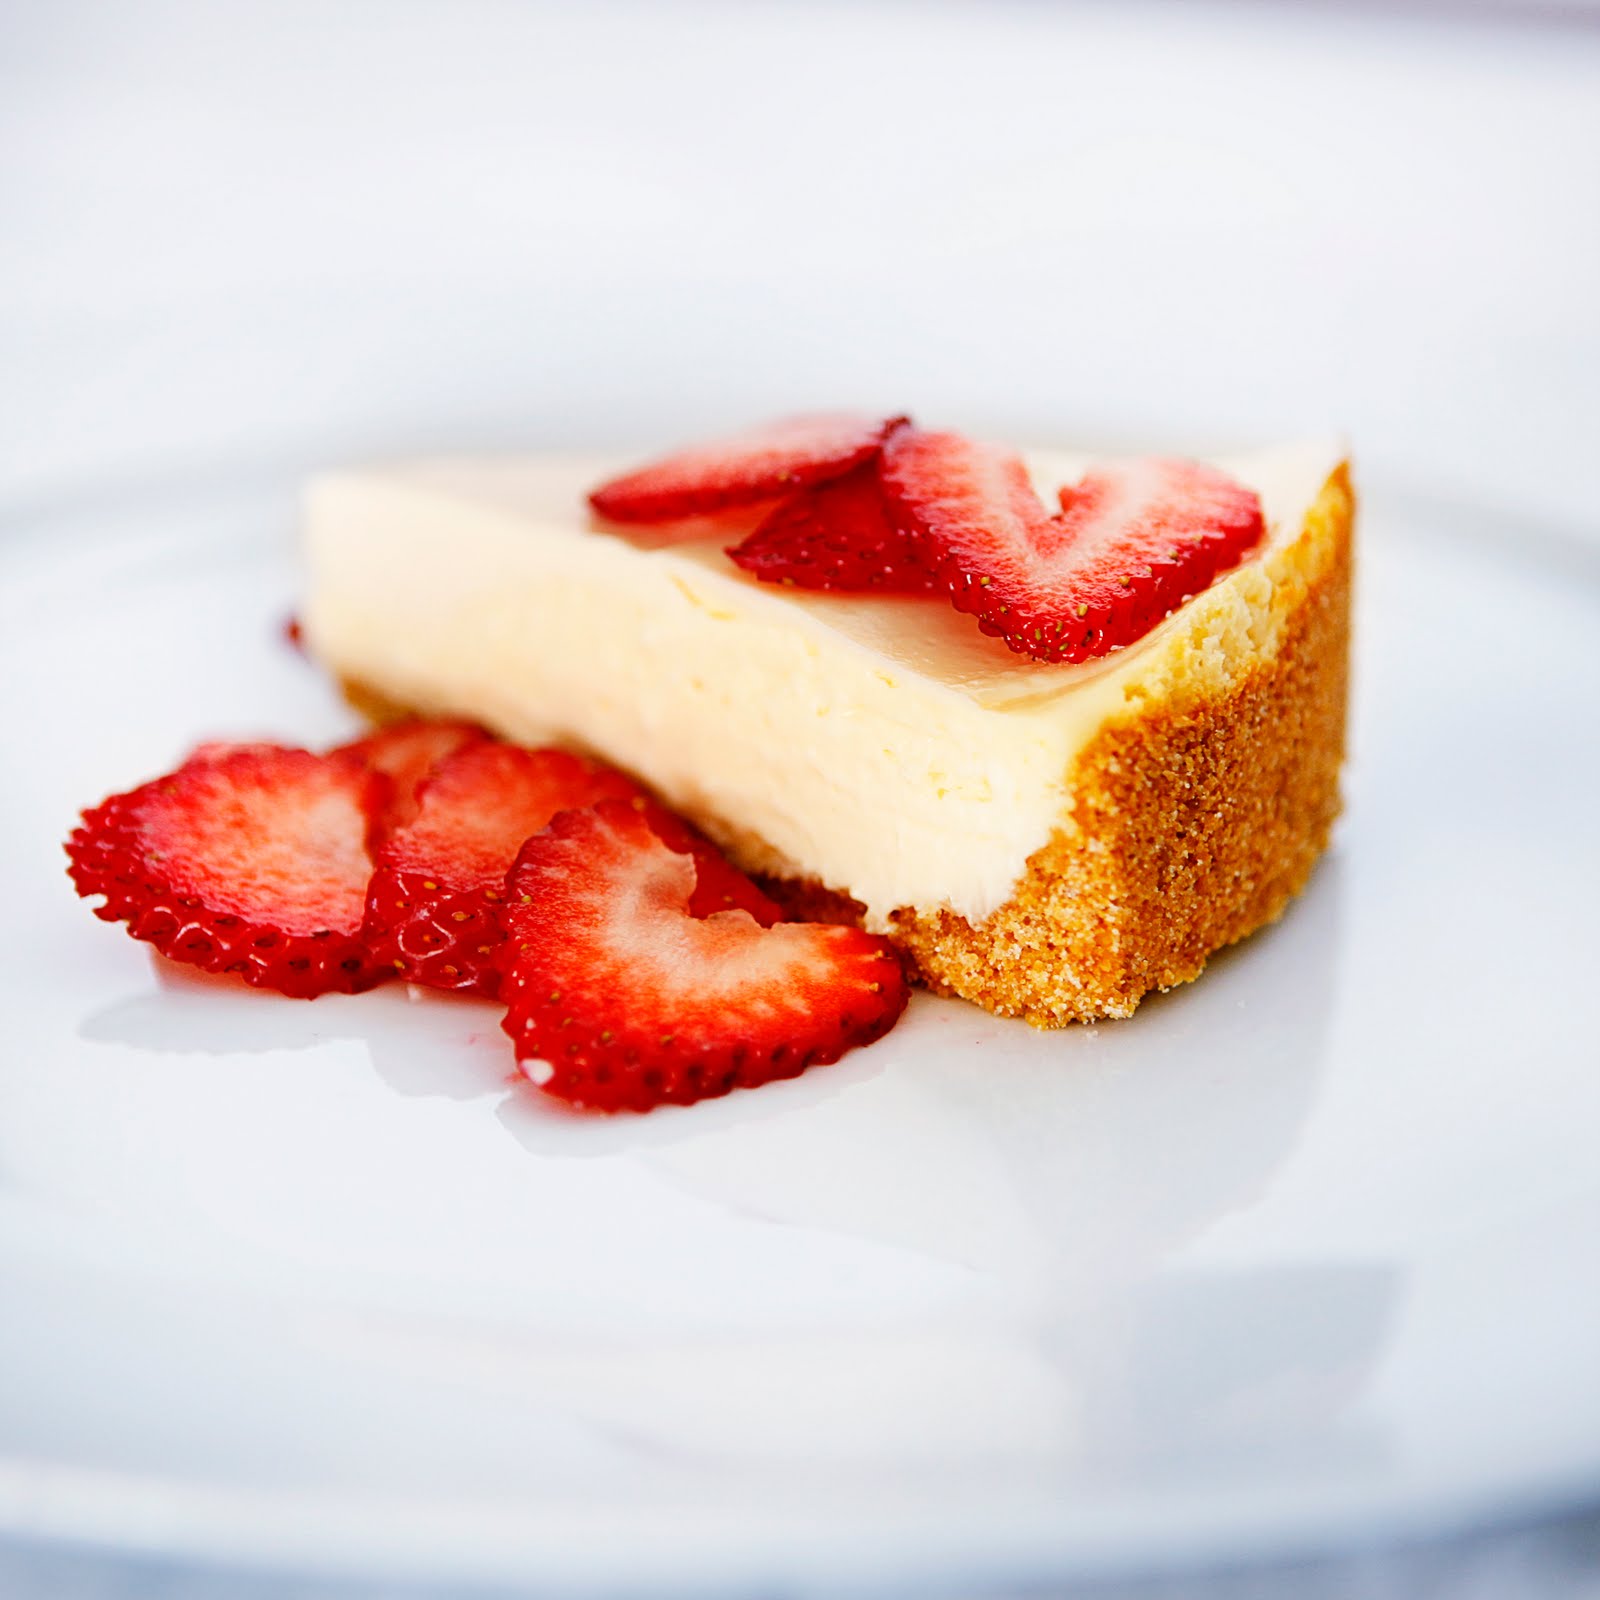 Confessions of a Bake-aholic: Cheesecake